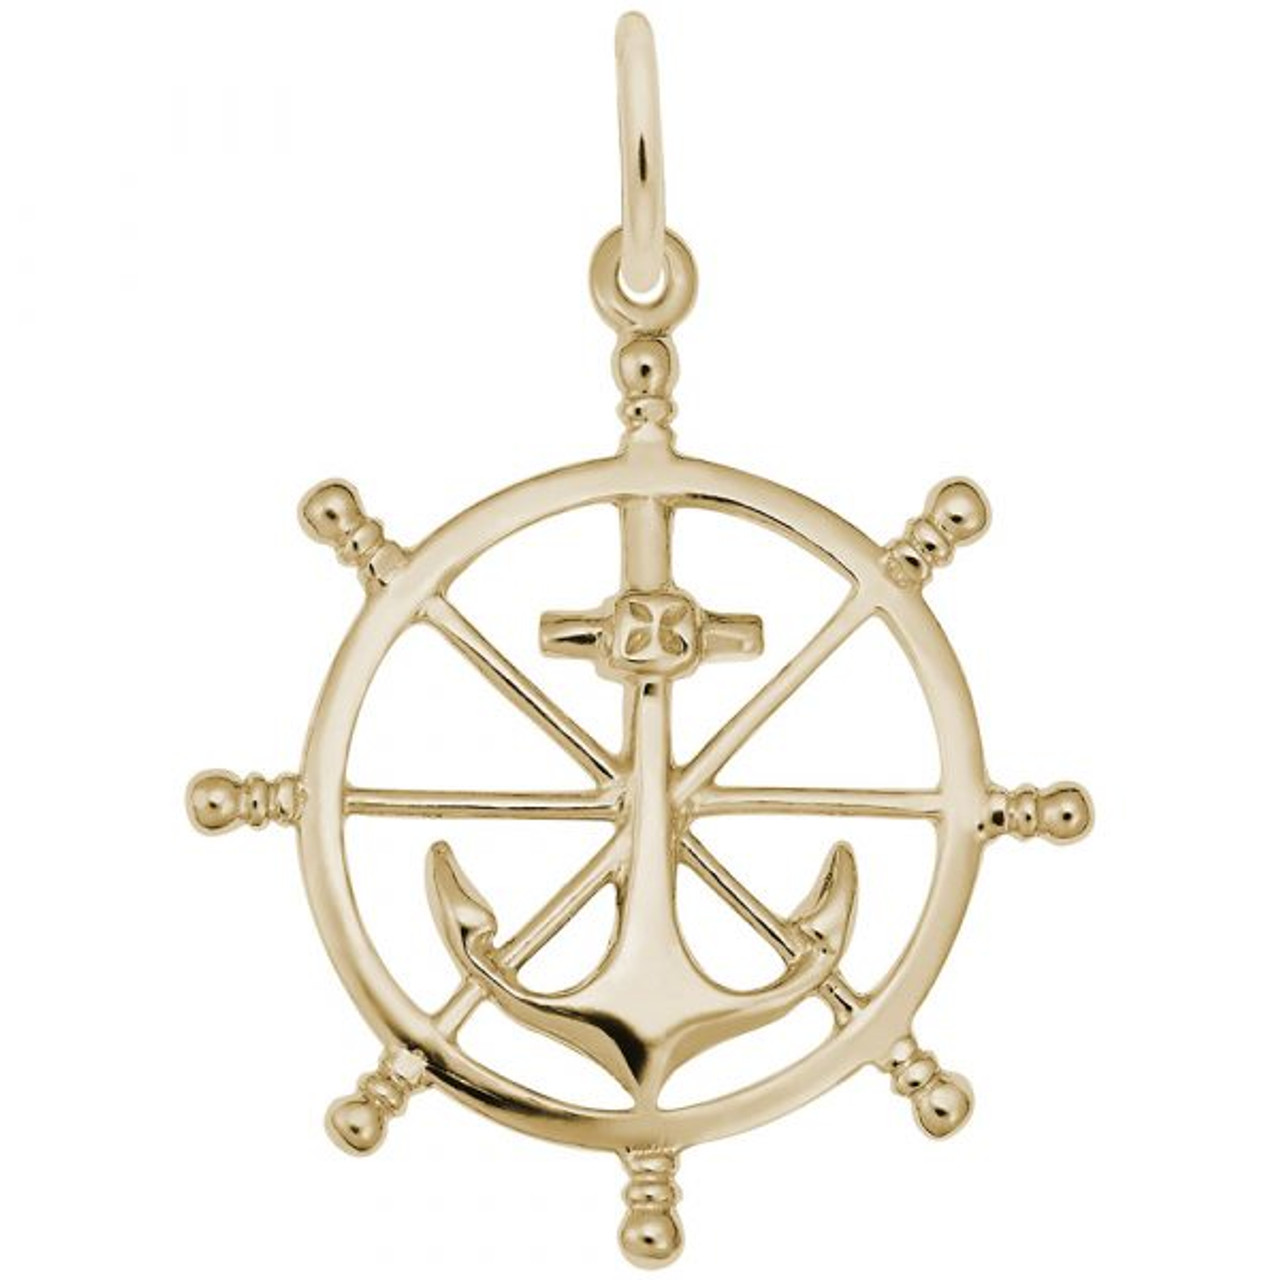 Anchor and Ship Wheel Charm - Gold Plate, 10k Gold, 14k Gold